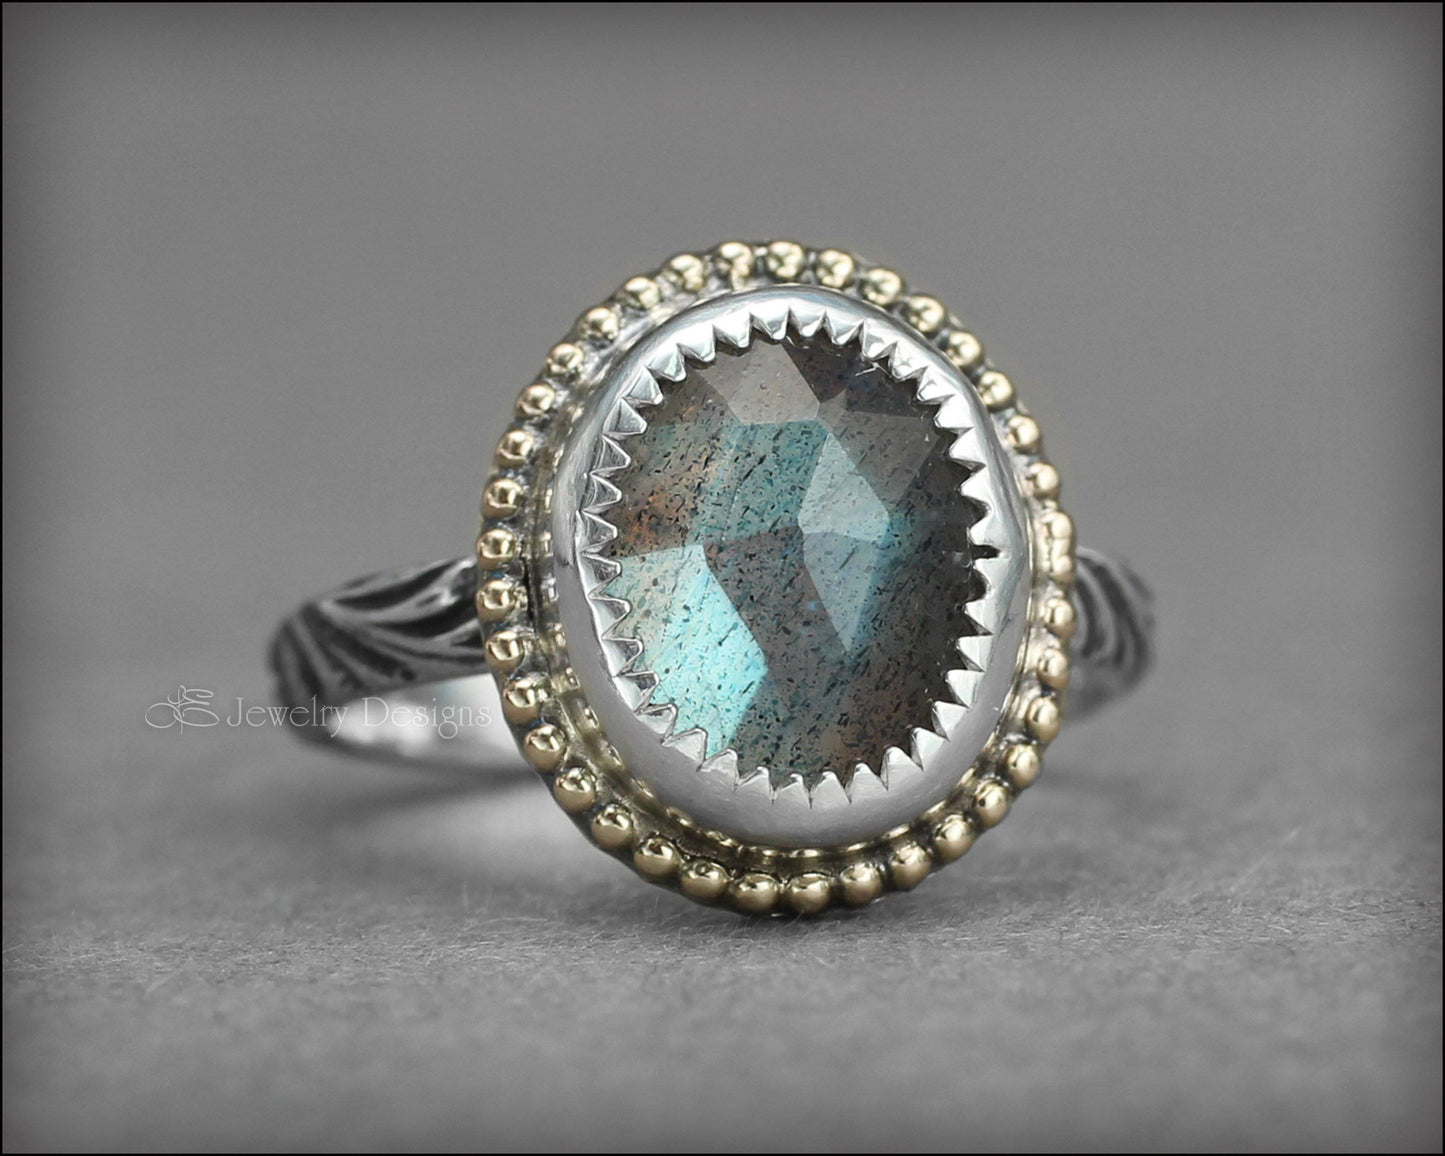 Load image into Gallery viewer, Rose Cut Gemstone Ring - (choose your stone) - LE Jewelry Designs
